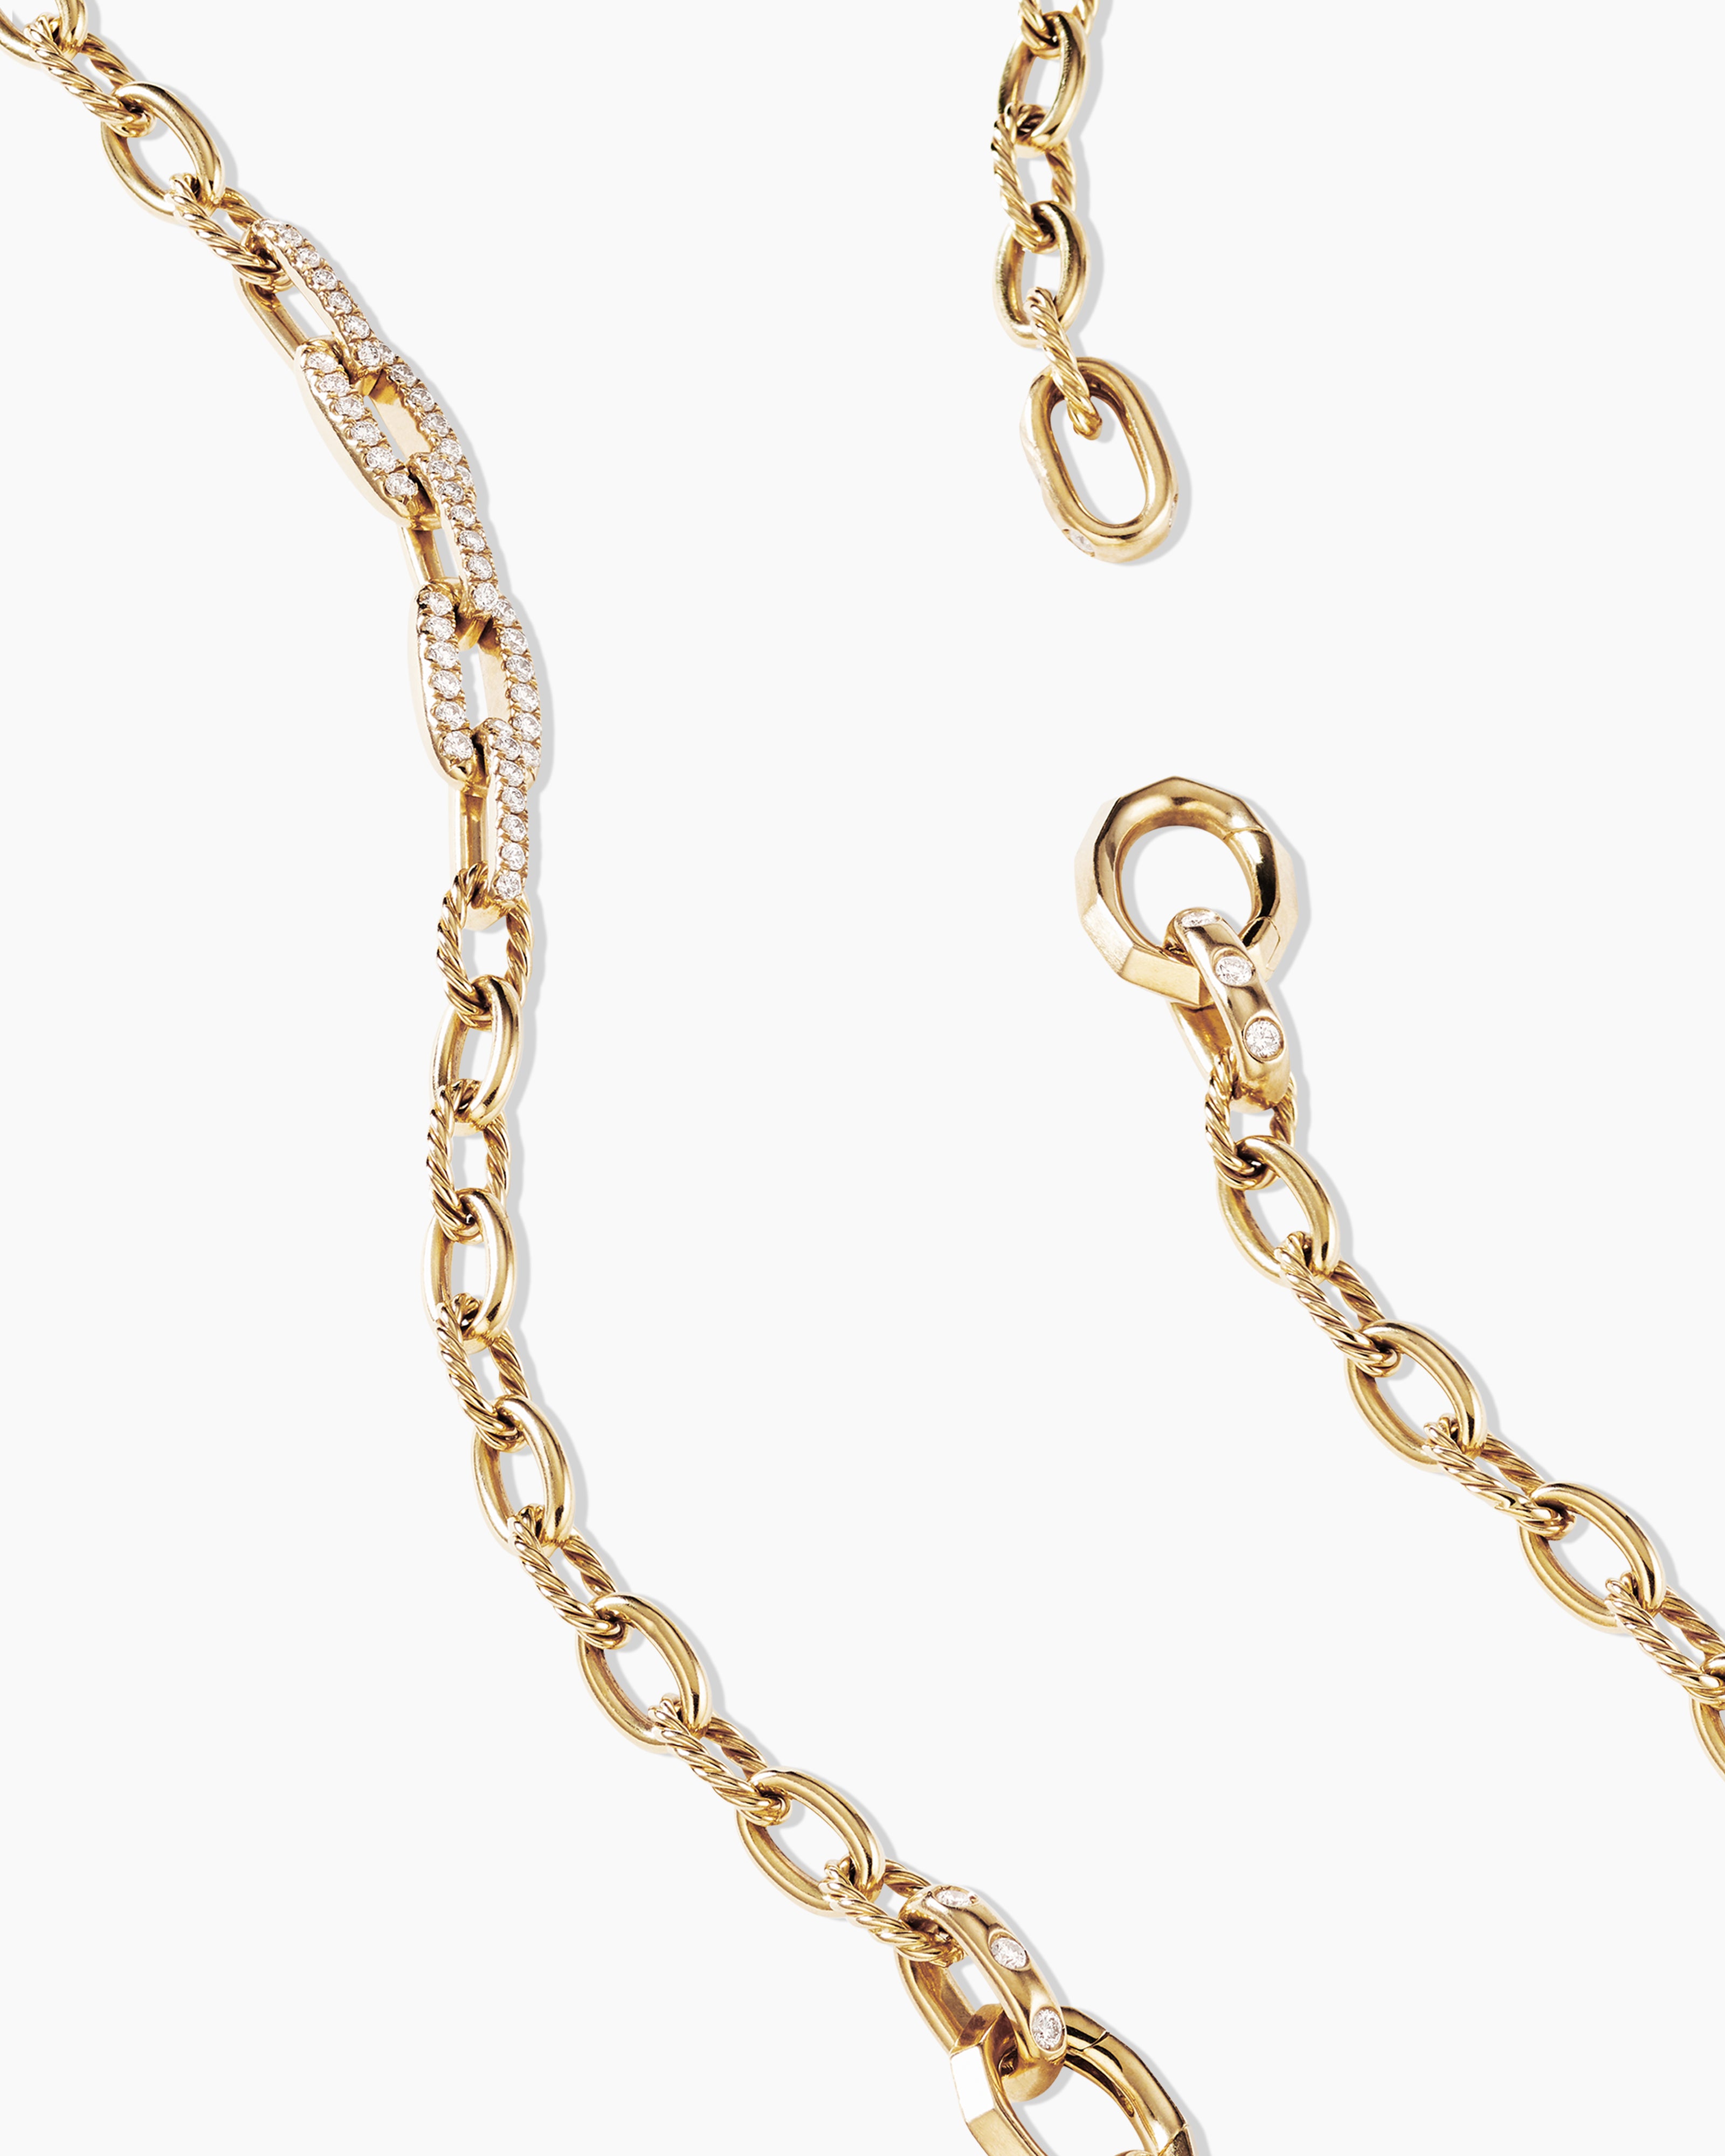 Stax Convertible Chain Necklace Yellow 5mm Gold | Diamonds, 18K with David Yurman in